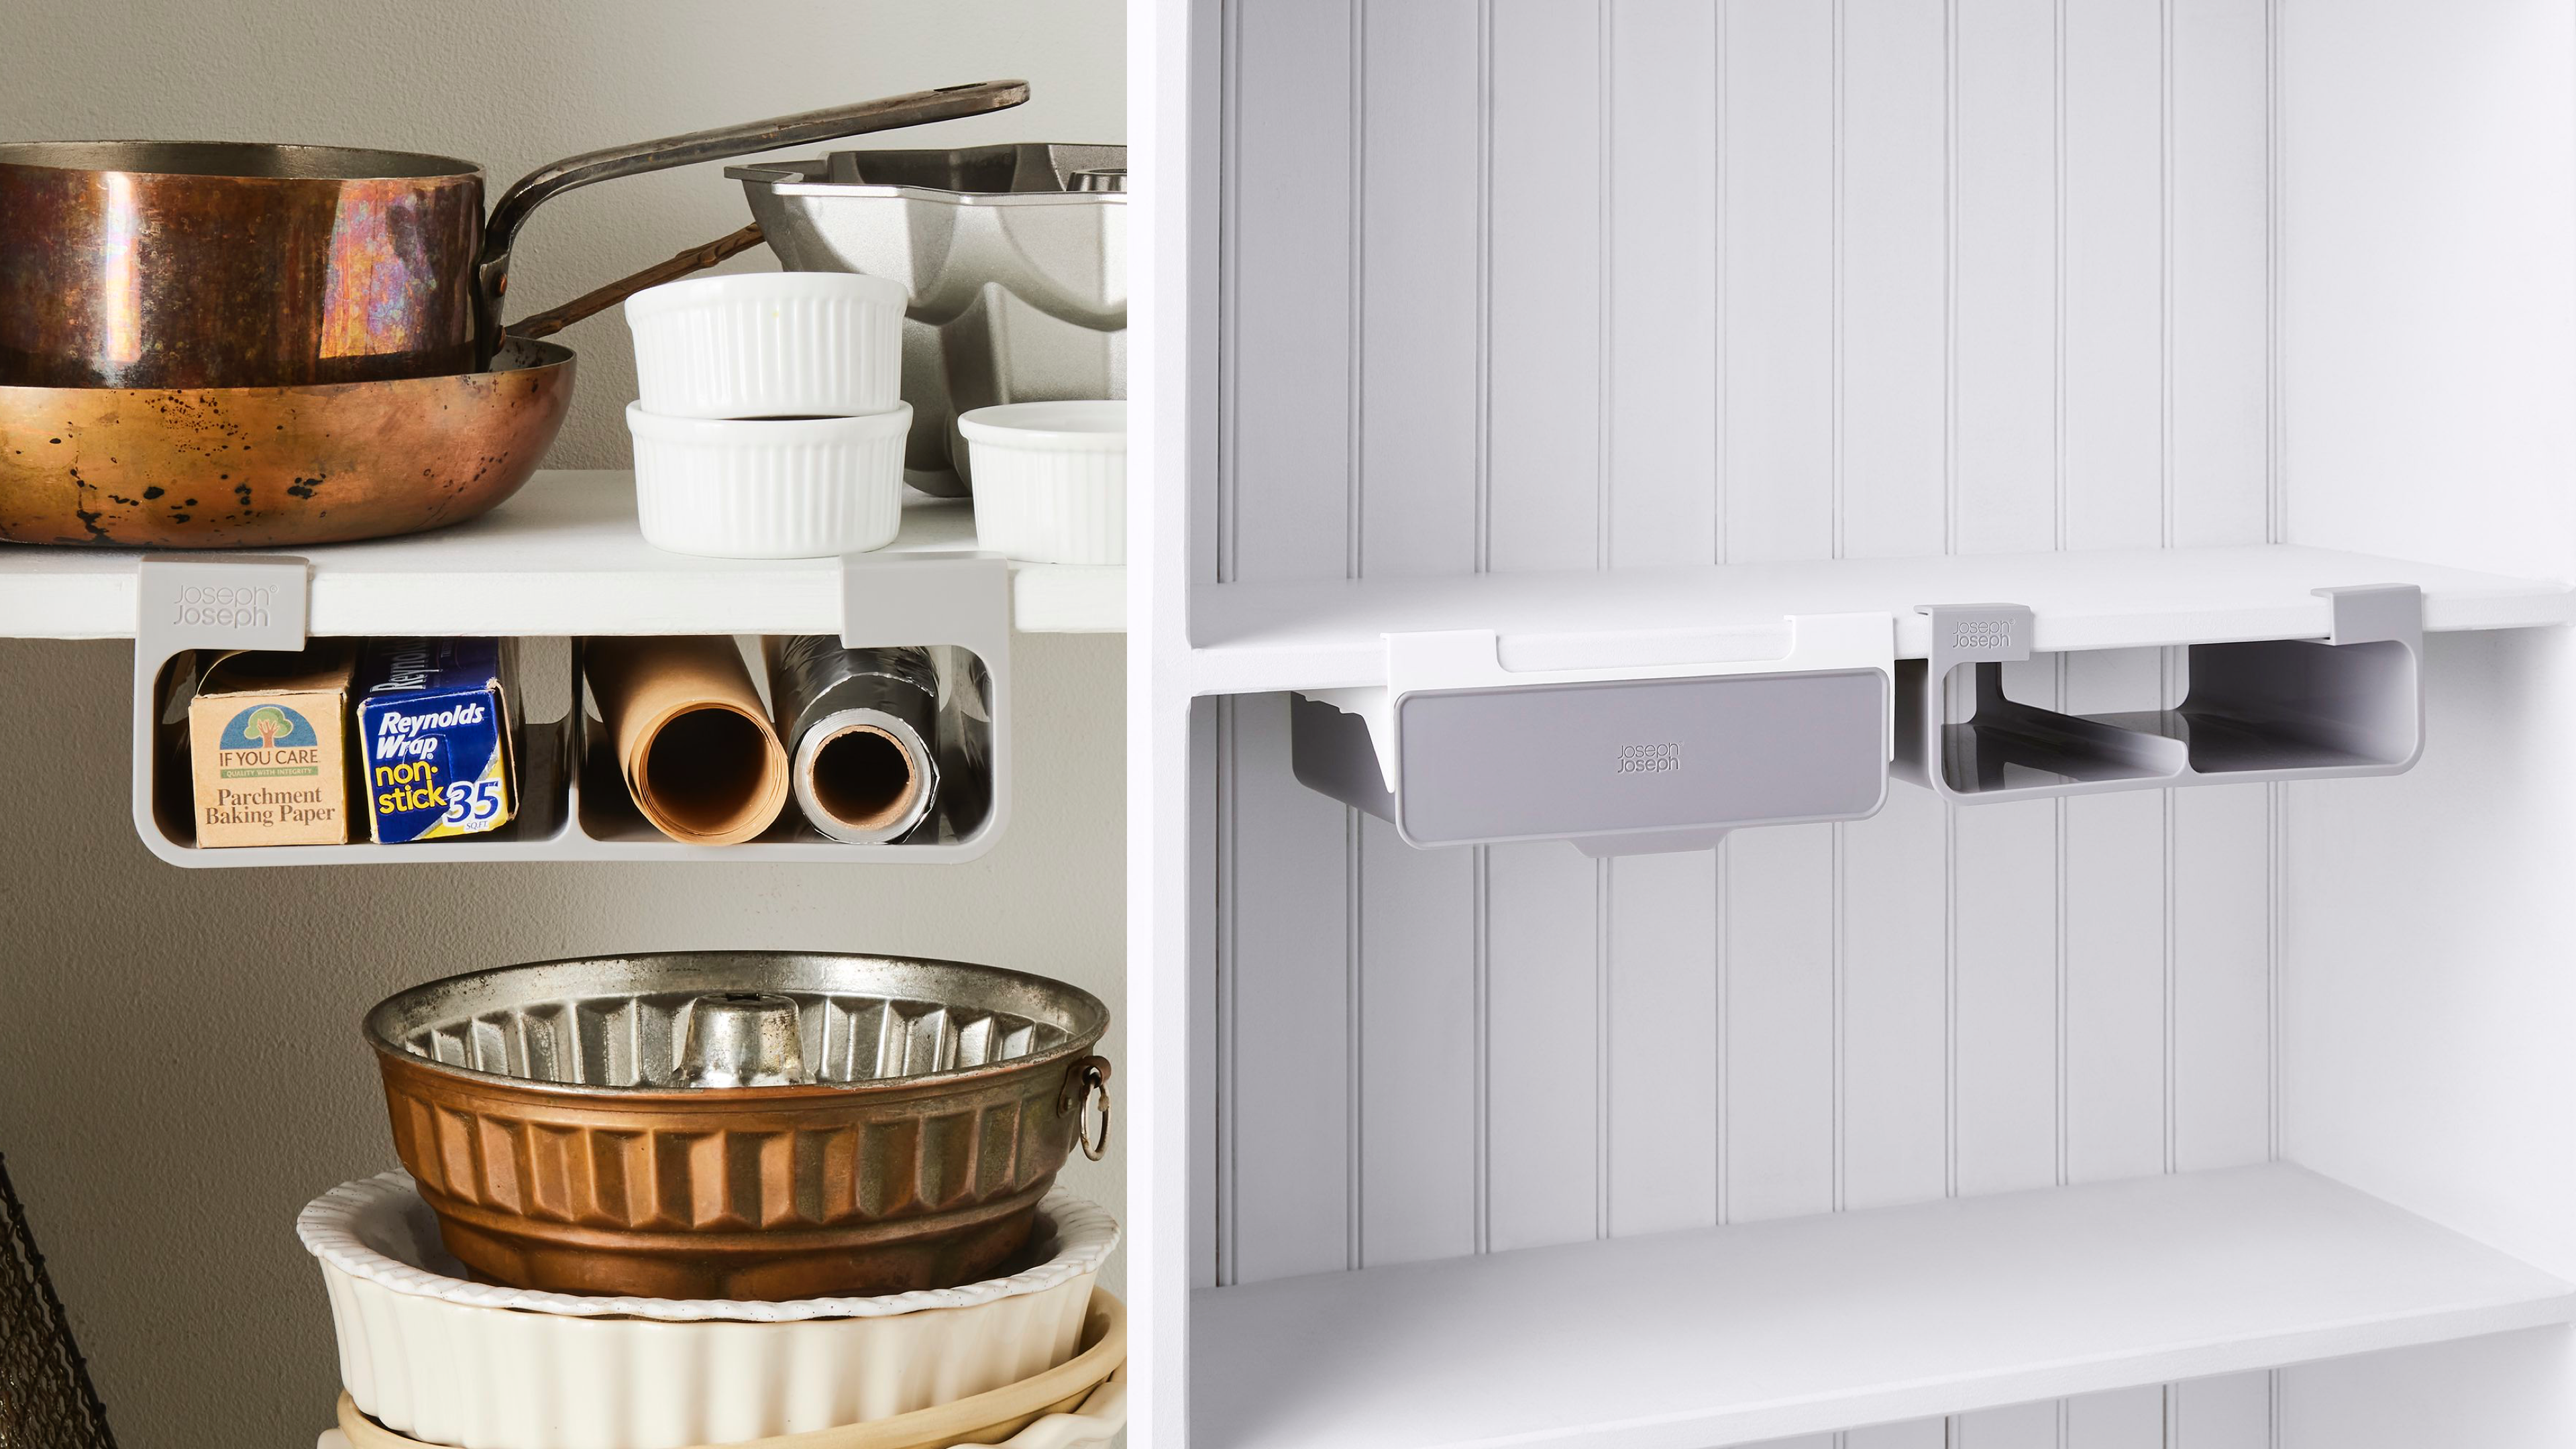 under-shelf storage drawers that attach to shelves without any tools needed